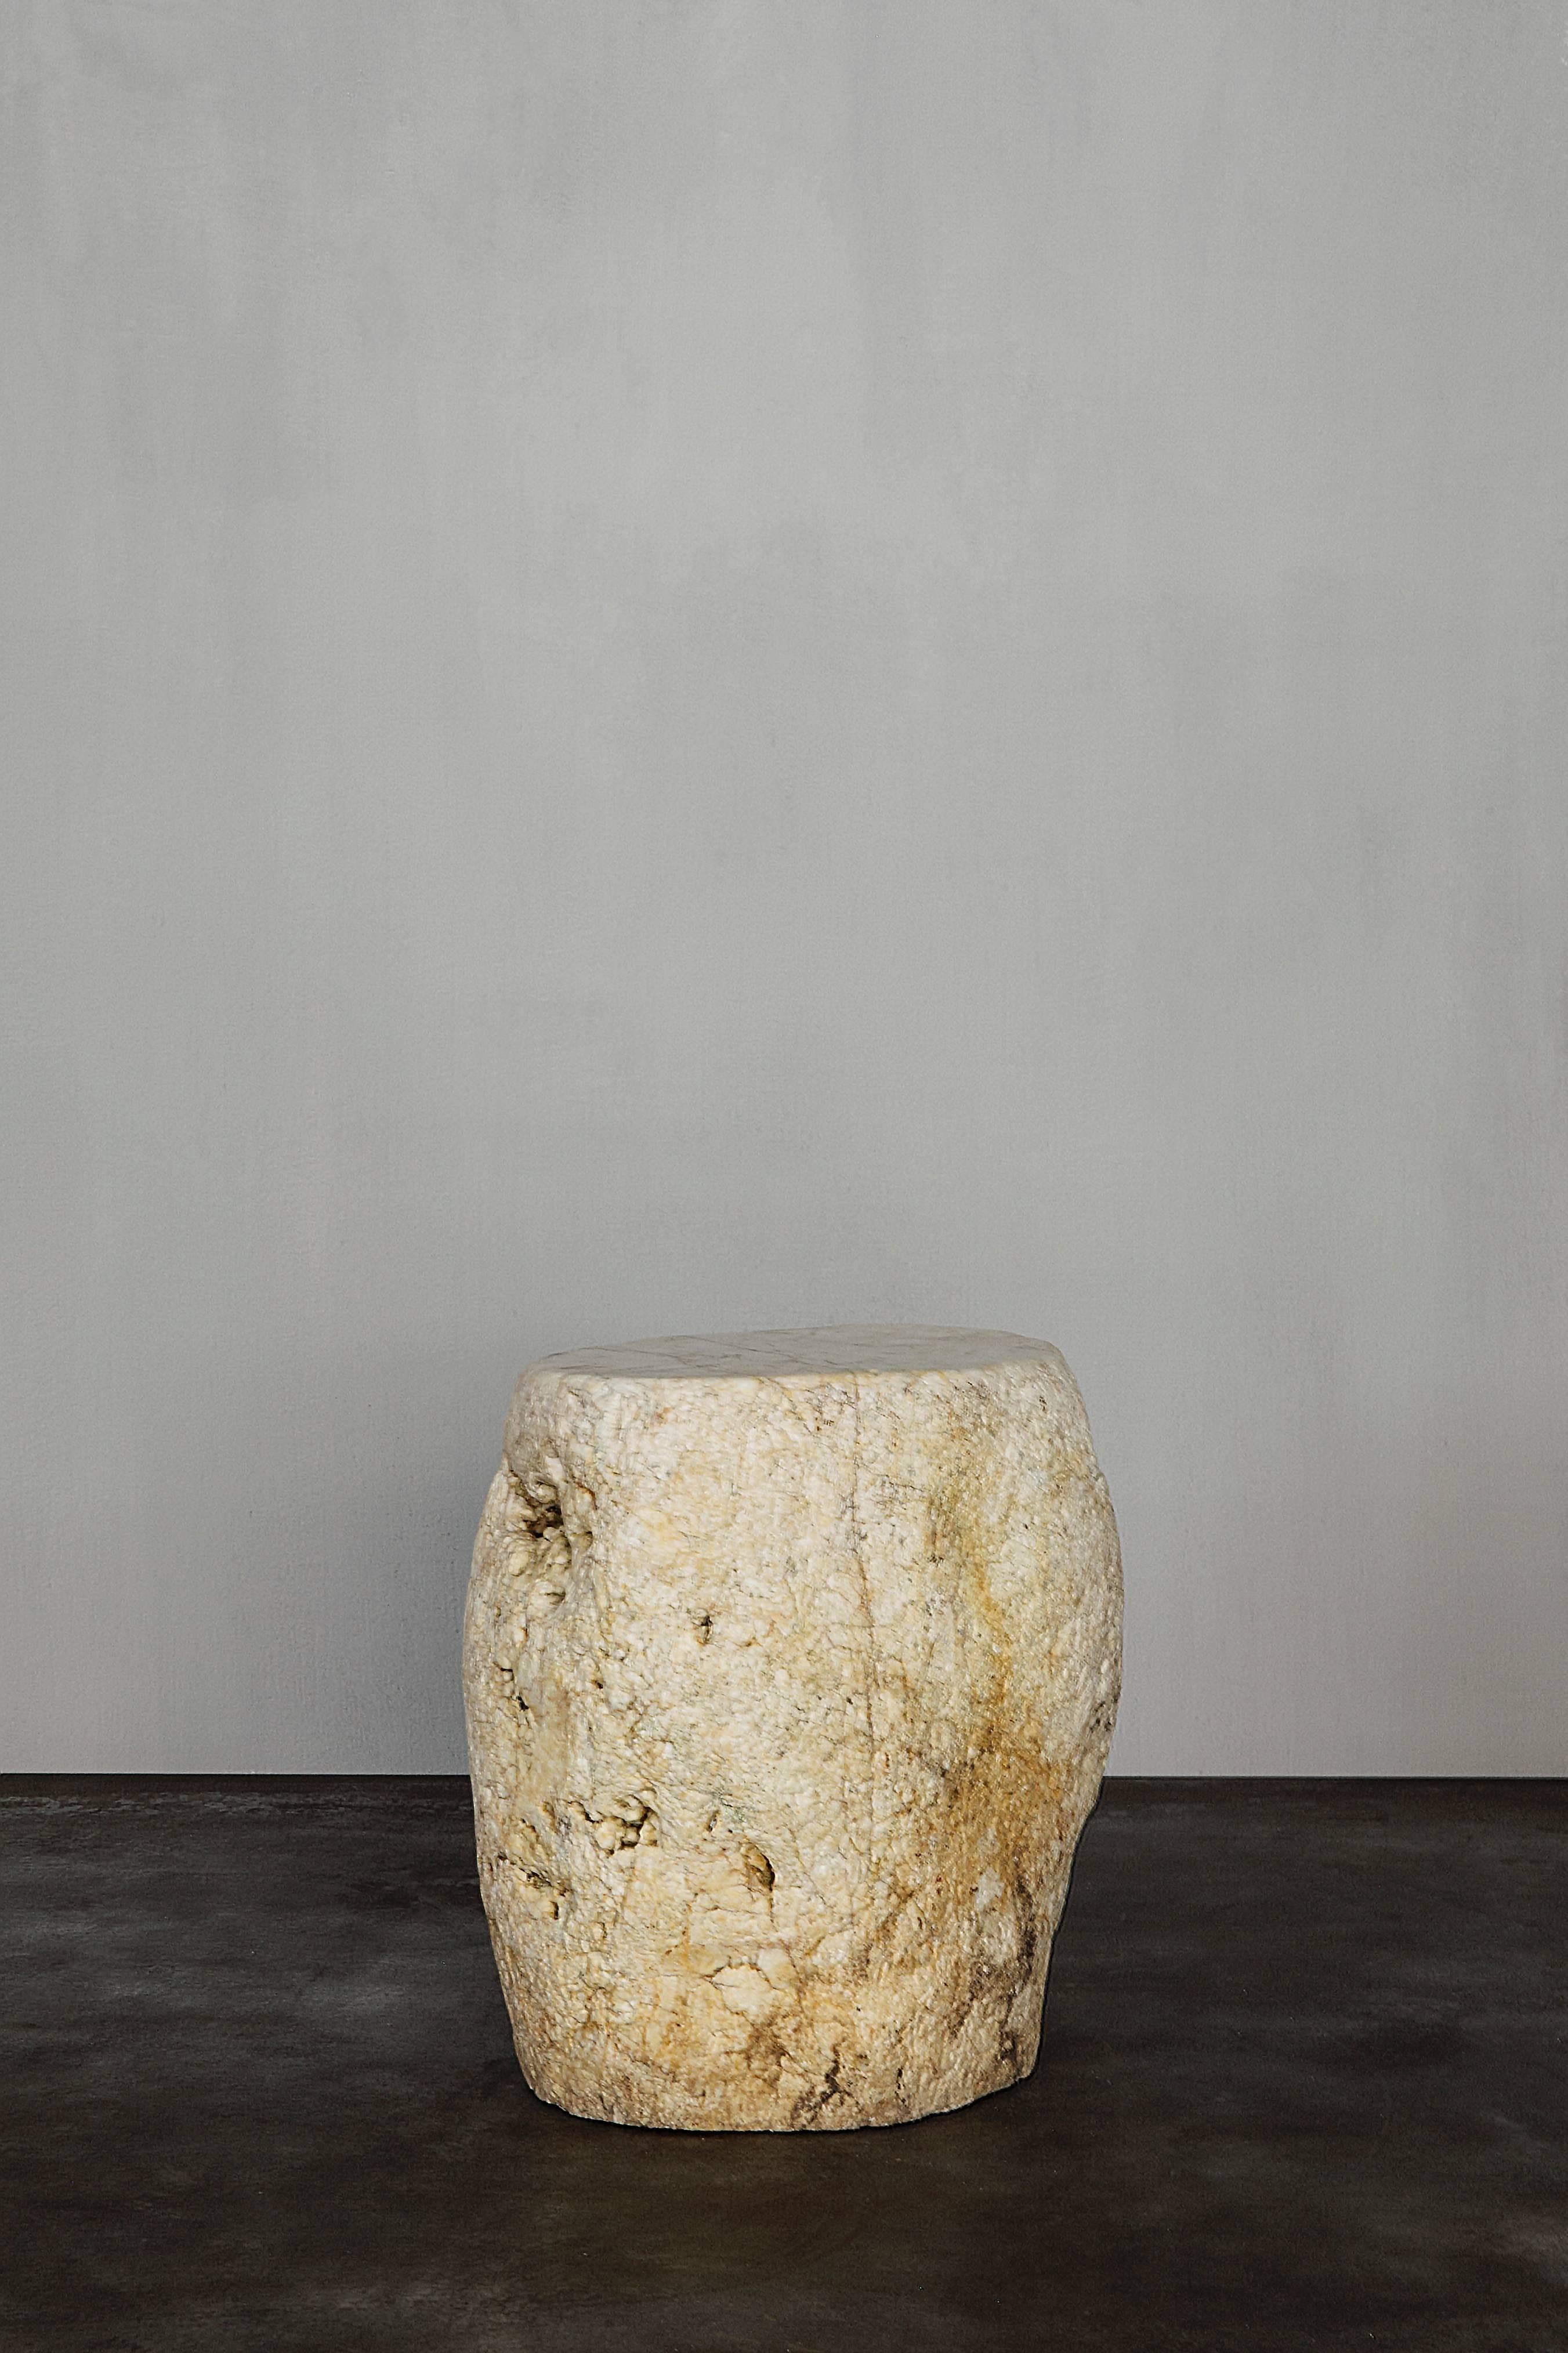 Beautiful stool in white Japanese marble from mid-20th century.